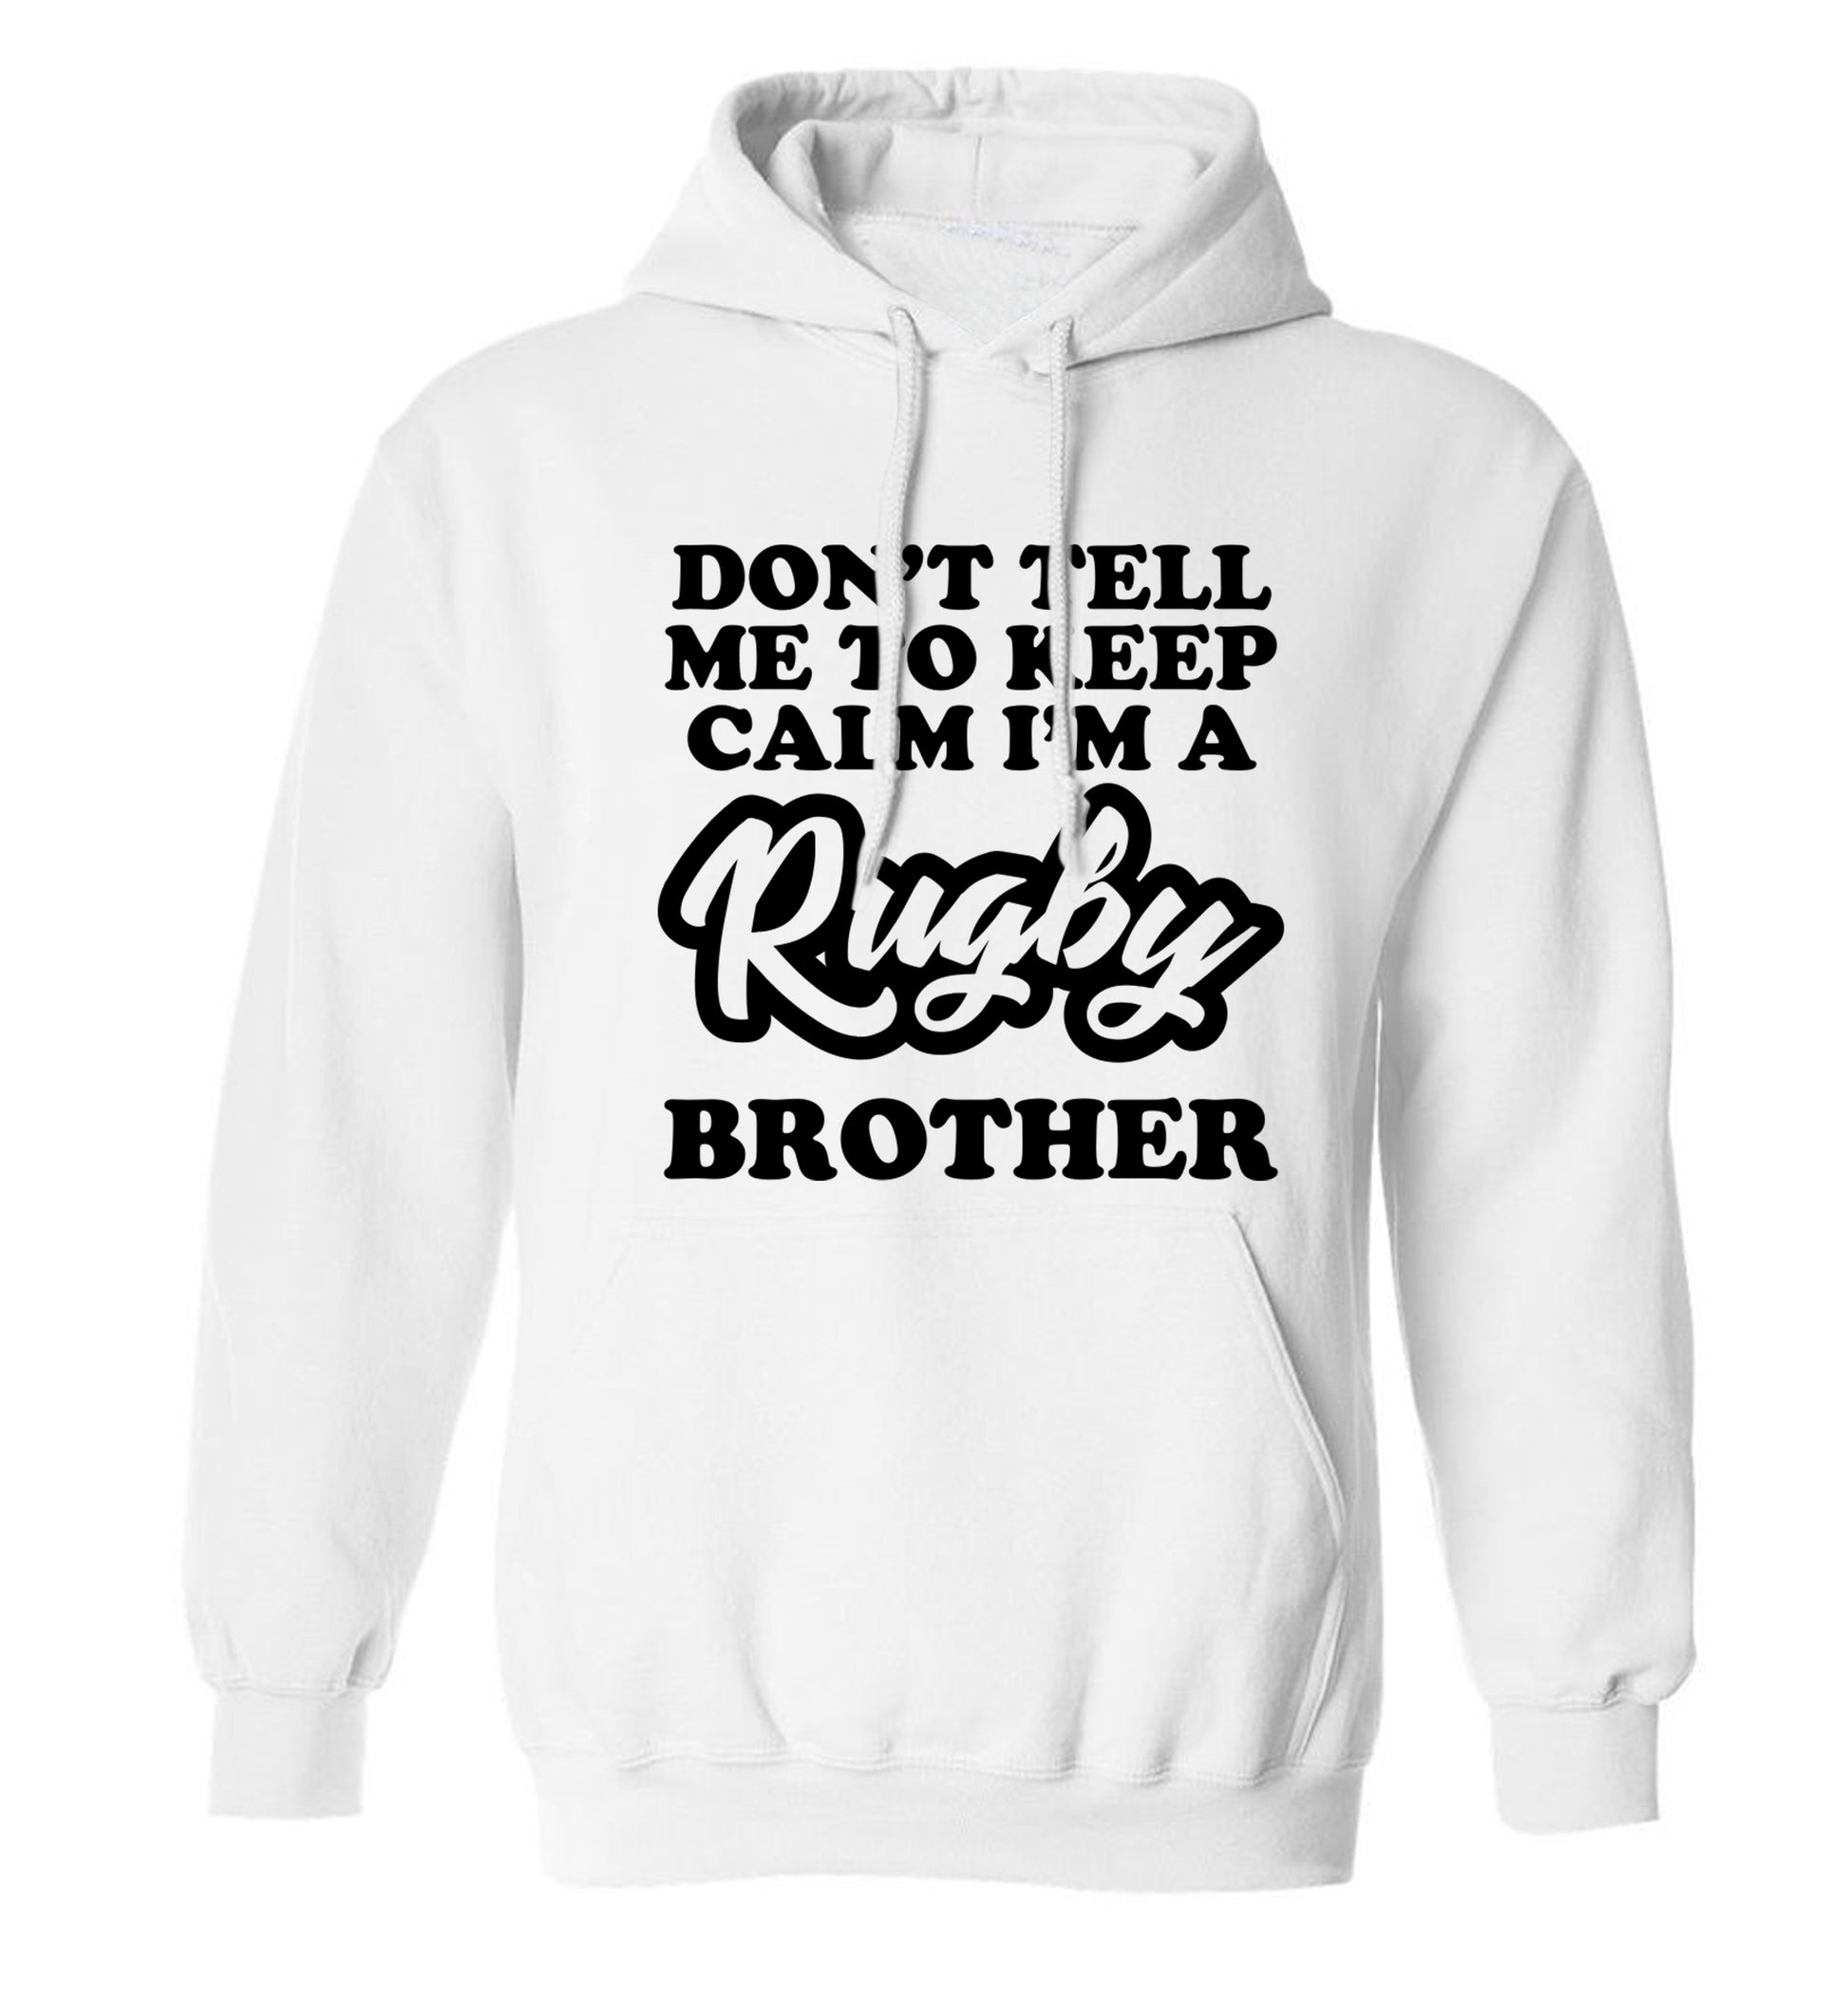 Don't tell me keep calm I'm a rugby brother adults unisex white hoodie 2XL